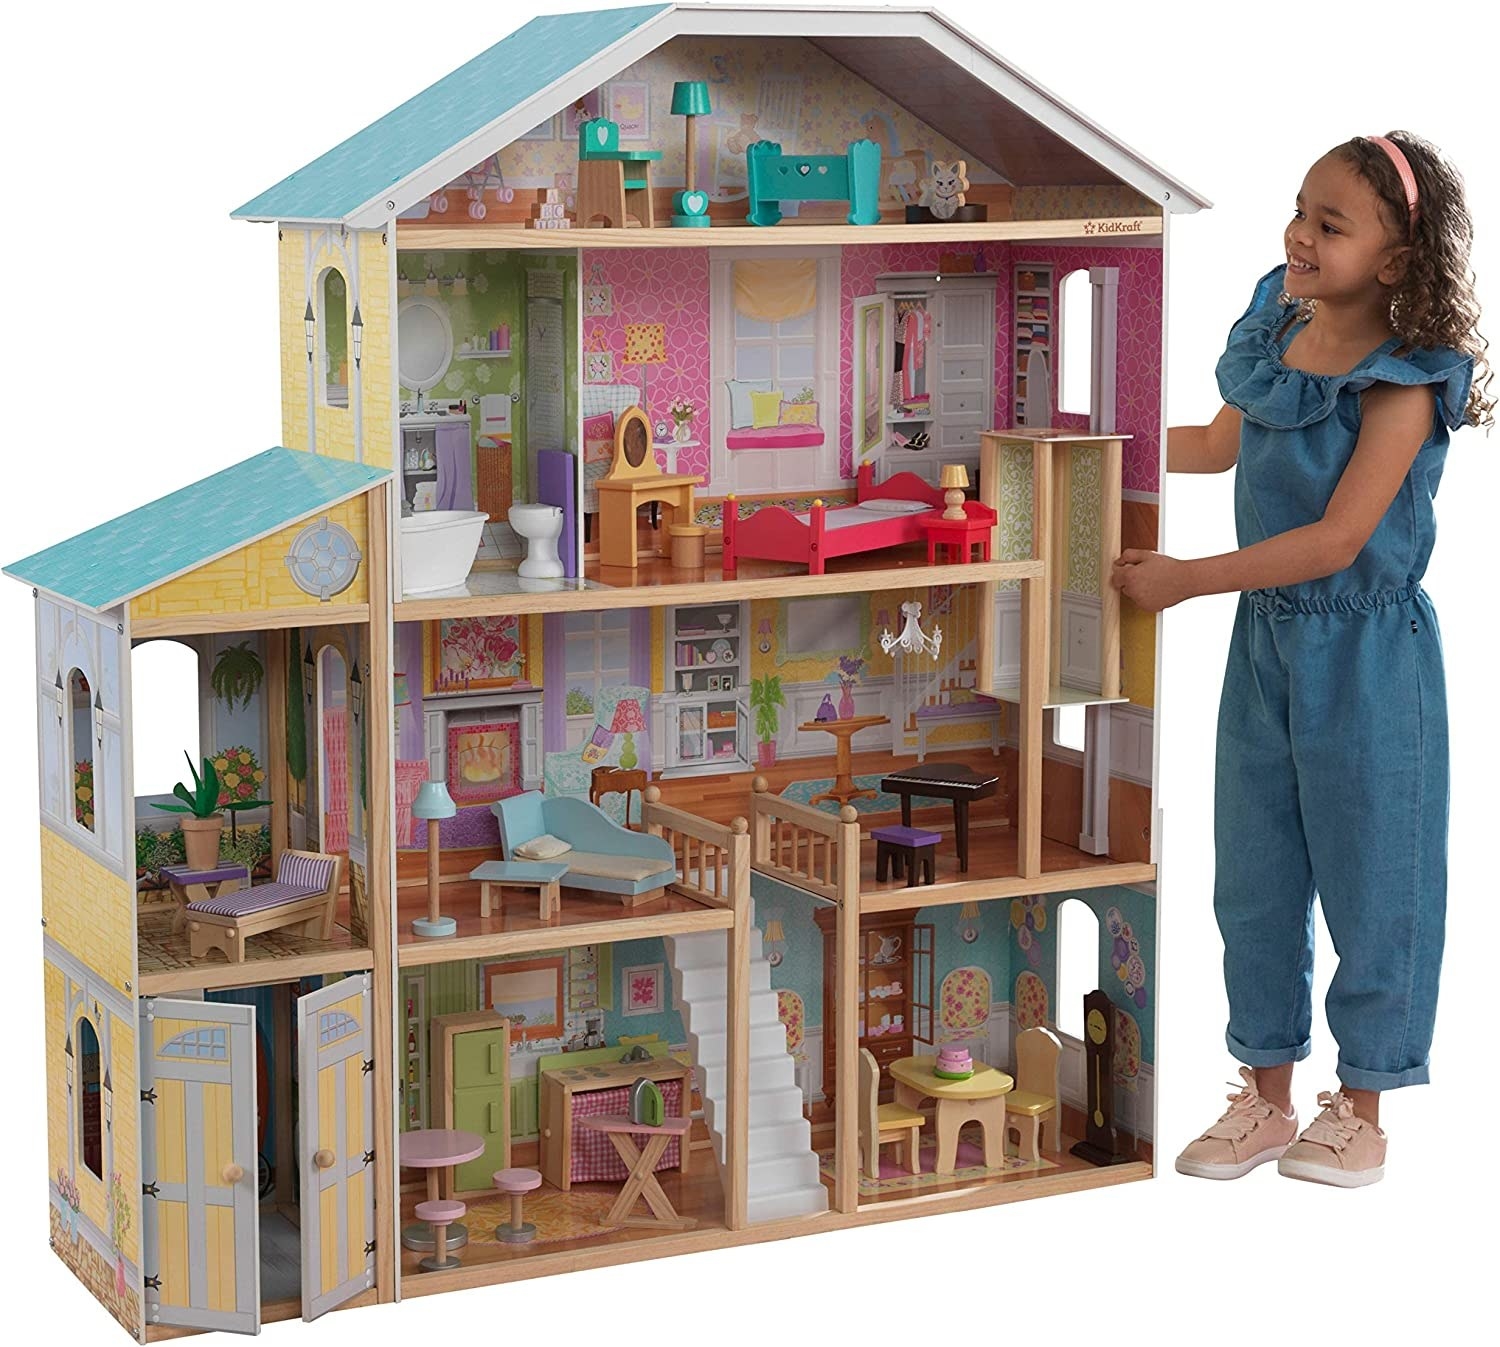 A kid standing next to the doll house playing with the elevator inside